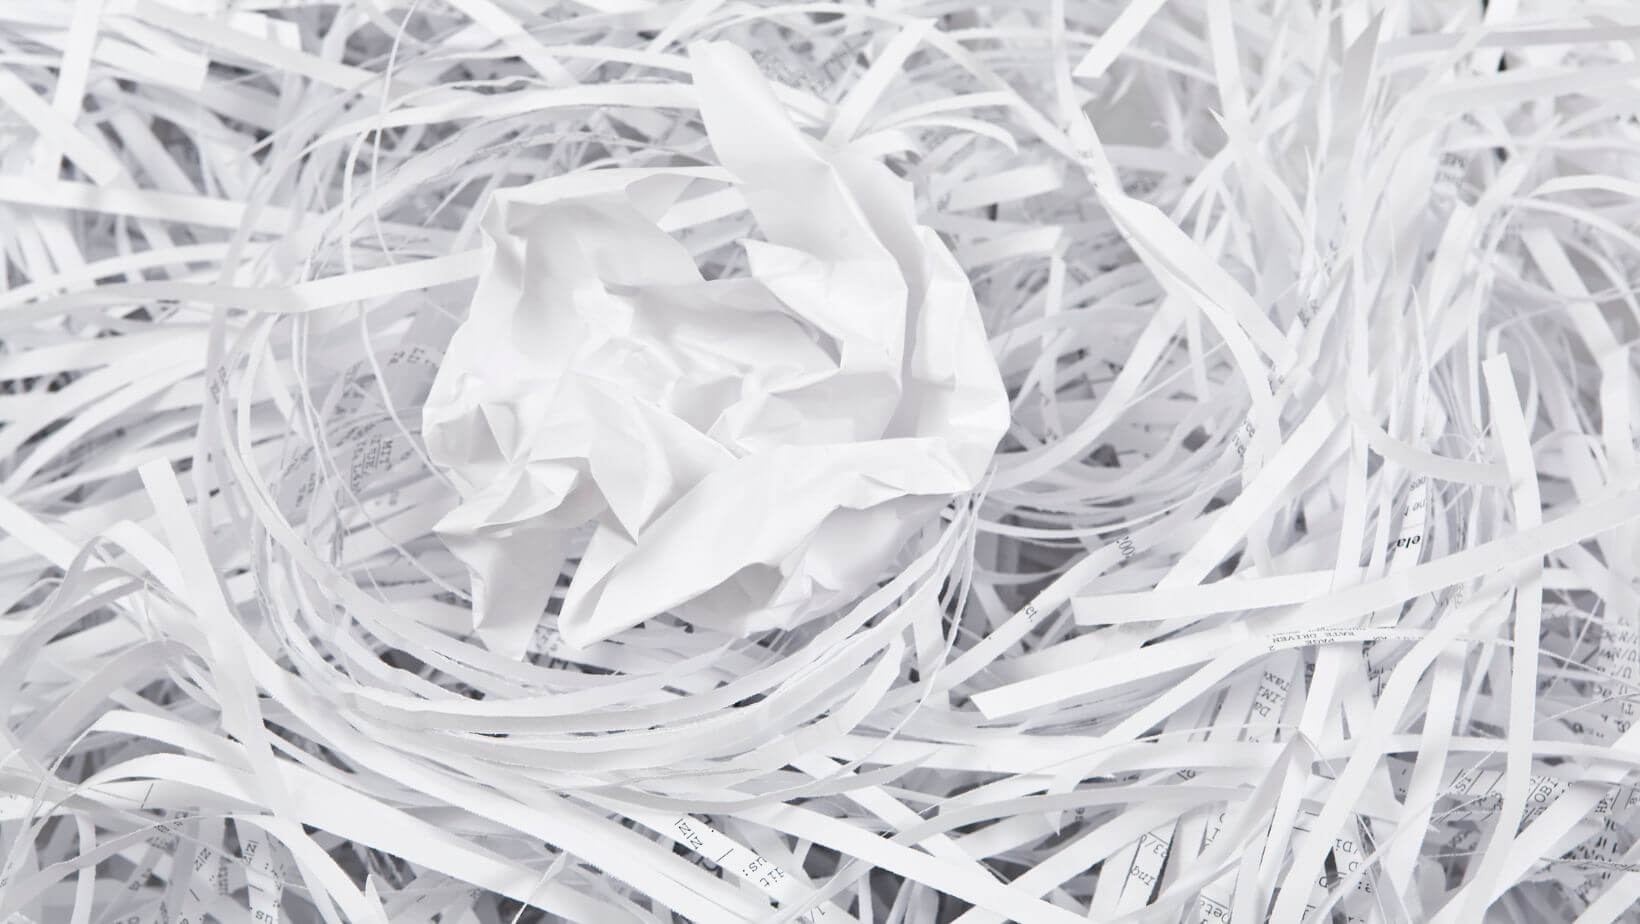 Protect Your Privacy: A Guide To Ongoing Shredding